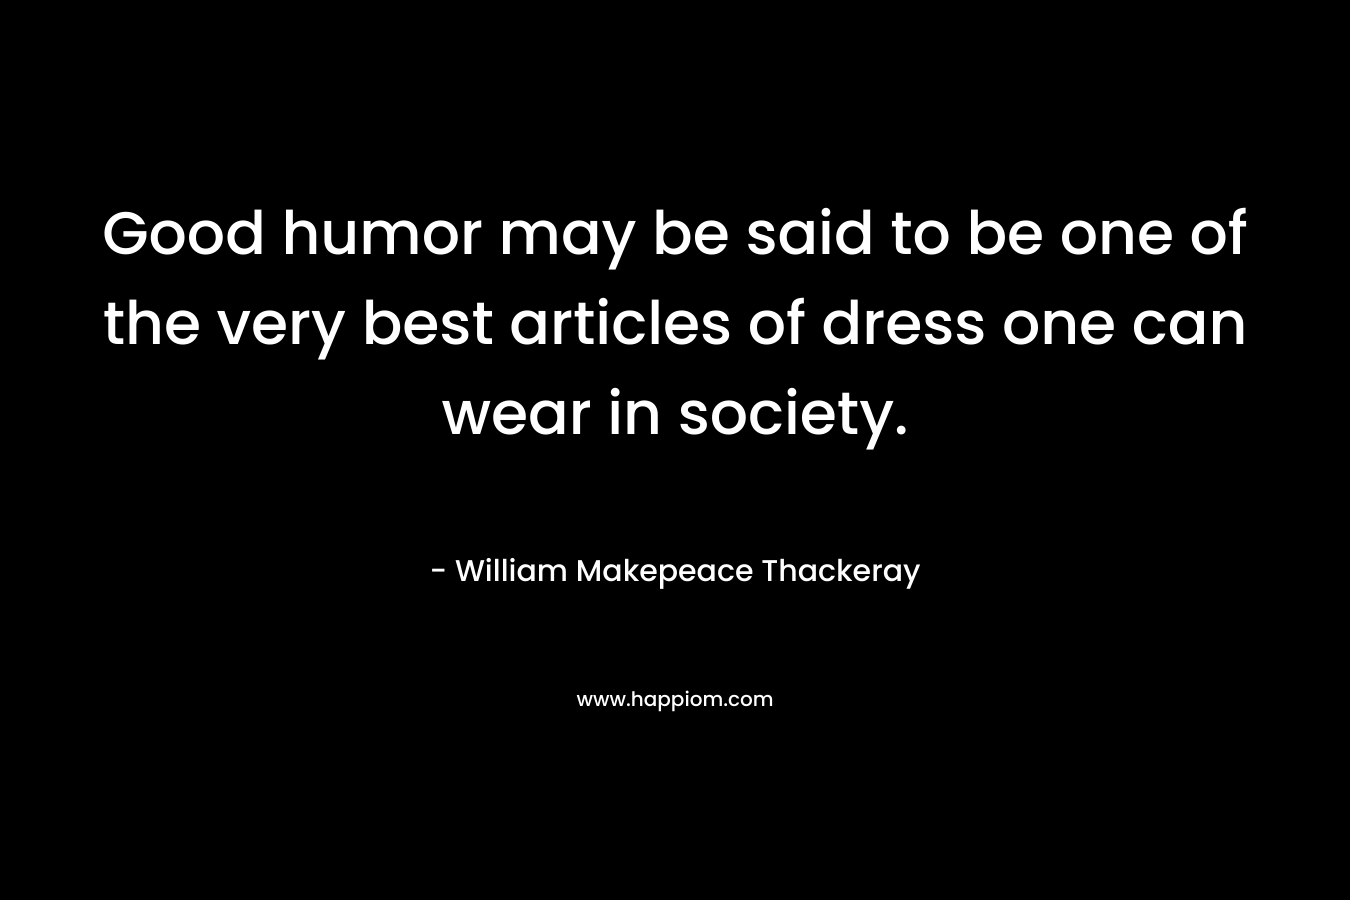 Good humor may be said to be one of the very best articles of dress one can wear in society. – William Makepeace Thackeray